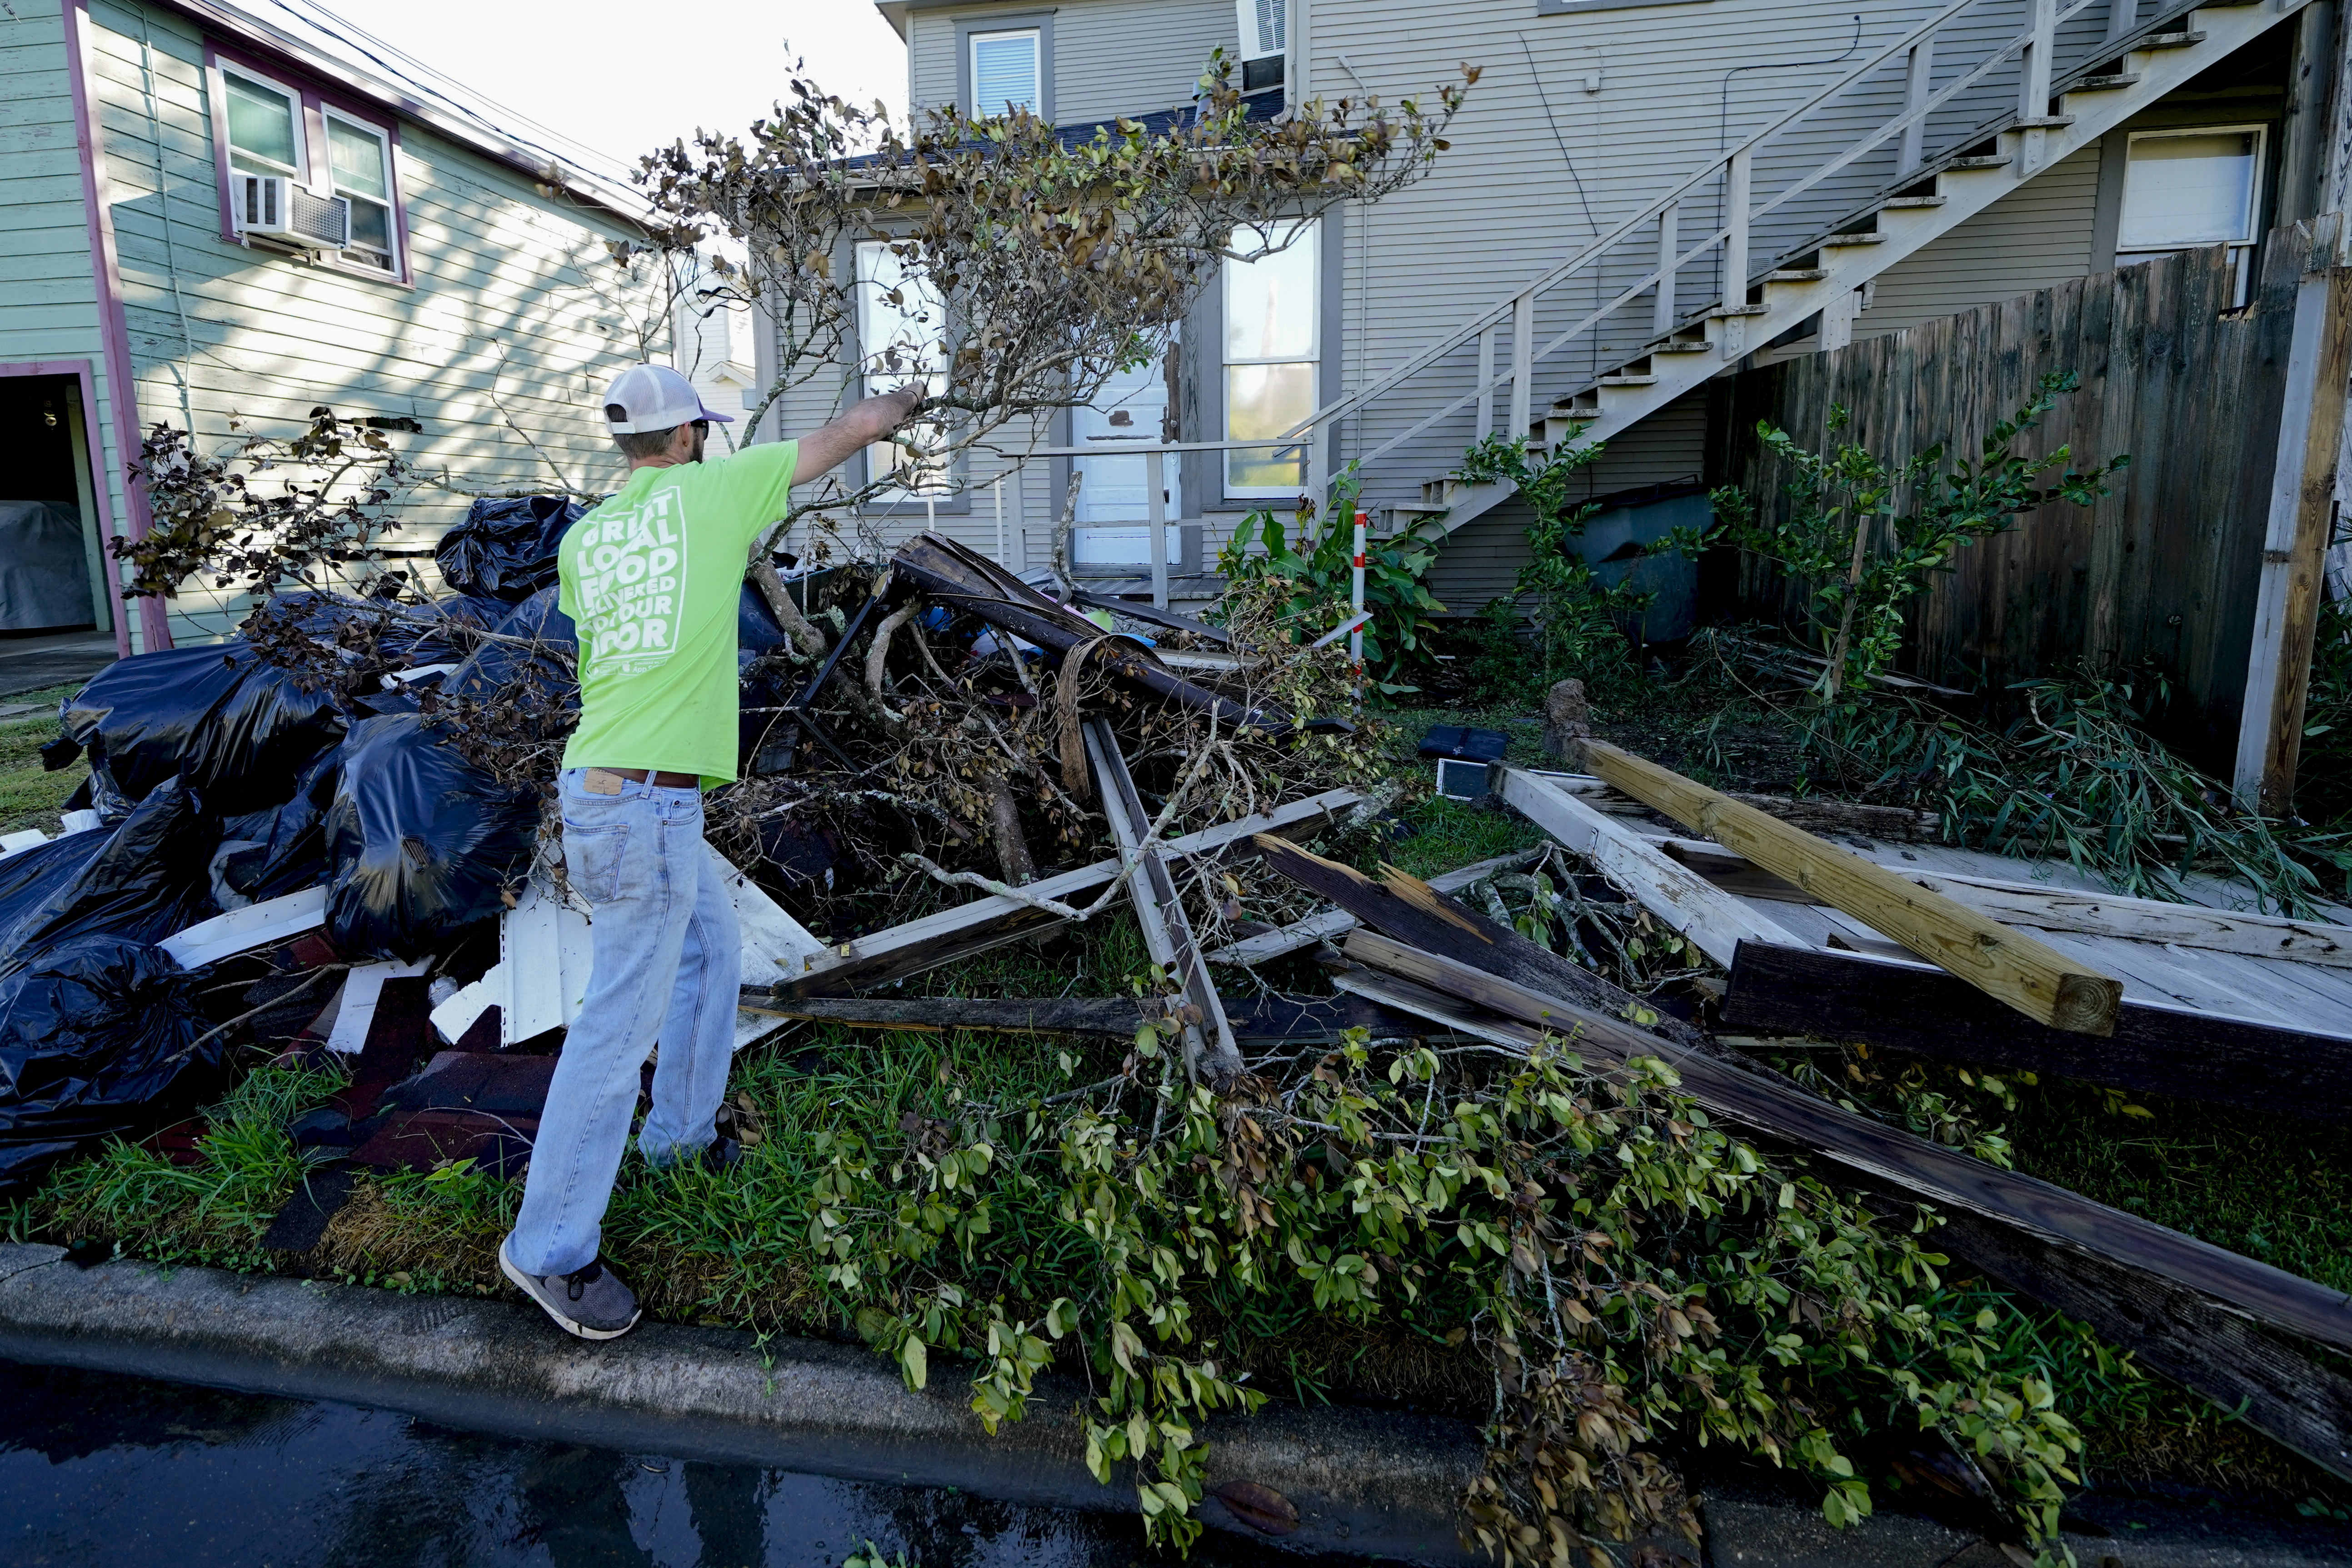 Caleb Cormier moves debris after Hurricane Delta moved through, Saturday, Oct. 10, 2020, in Lake Charles, La. Delta hit as a Category 2 hurricane with top winds of 100 mph (155 kph) before rapidly weakening over land. Photo: AP